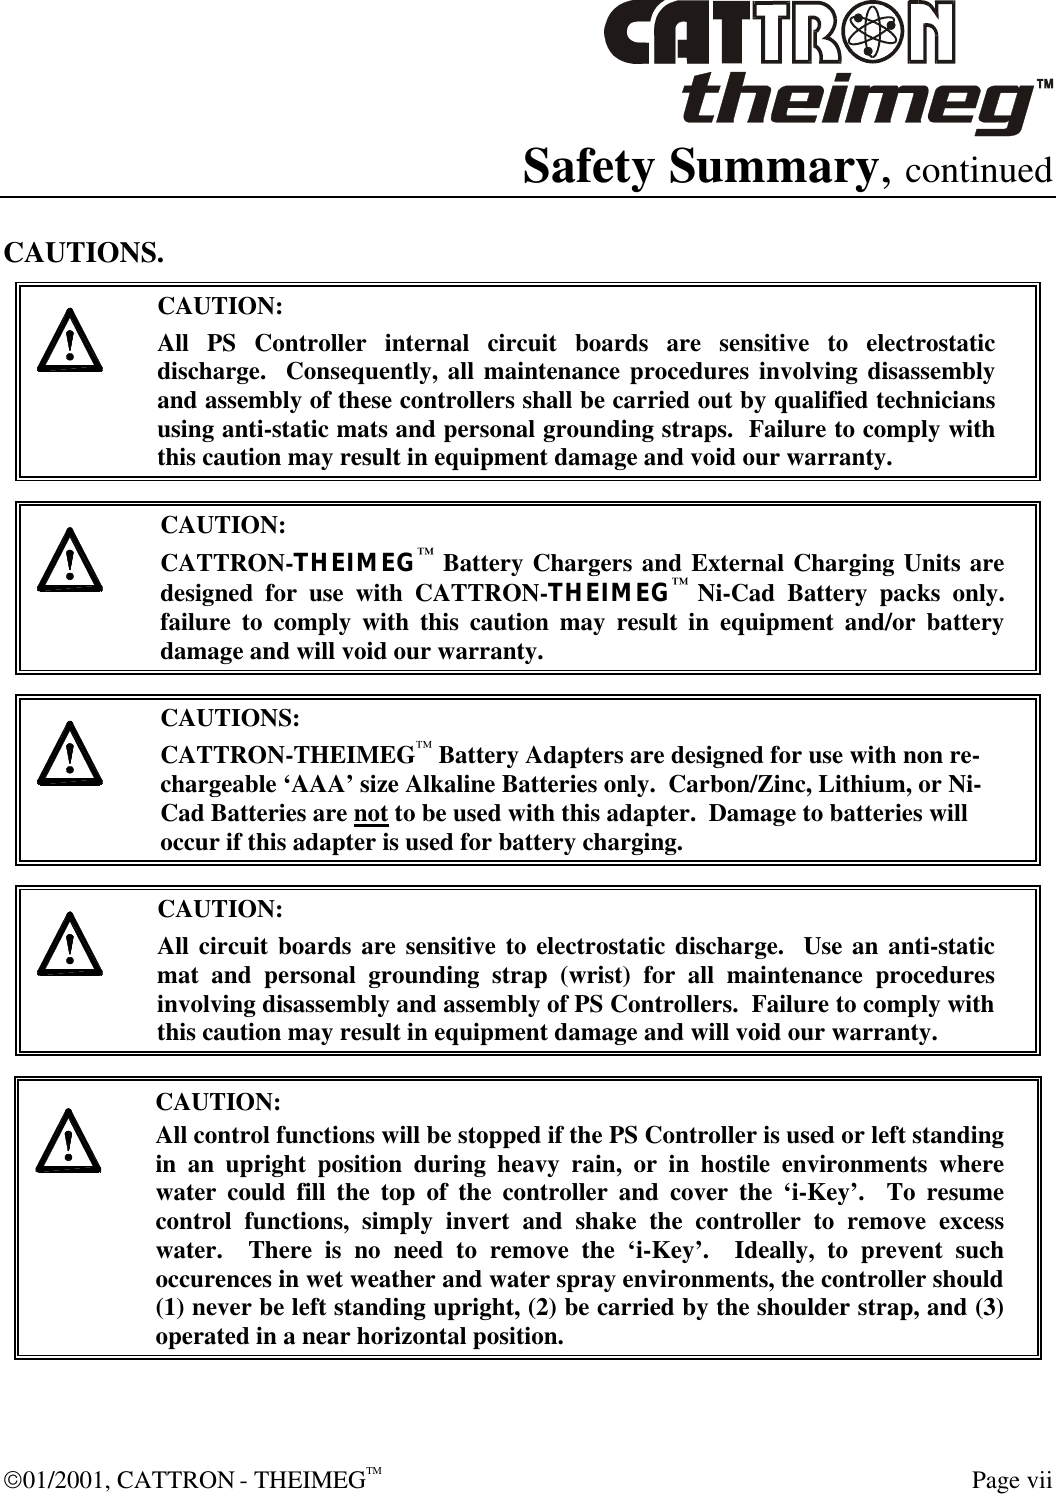  01/2001, CATTRON - THEIMEGTM  Page vii Safety Summary, continued CAUTIONS.     CAUTION: All PS Controller internal circuit boards are sensitive to electrostatic discharge.  Consequently, all maintenance procedures involving disassembly and assembly of these controllers shall be carried out by qualified technicians using anti-static mats and personal grounding straps.  Failure to comply with this caution may result in equipment damage and void our warranty.     CAUTION: CATTRON-THEIMEG™ Battery Chargers and External Charging Units are designed for use with CATTRON-THEIMEG™ Ni-Cad Battery packs only.  failure to comply with this caution may result in equipment and/or battery damage and will void our warranty.     CAUTIONS: CATTRON-THEIMEG™ Battery Adapters are designed for use with non re-chargeable ‘AAA’ size Alkaline Batteries only.  Carbon/Zinc, Lithium, or Ni-Cad Batteries are not to be used with this adapter.  Damage to batteries will occur if this adapter is used for battery charging.      CAUTION: All circuit boards are sensitive to electrostatic discharge.  Use an anti-static mat and personal grounding strap (wrist) for all maintenance procedures involving disassembly and assembly of PS Controllers.  Failure to comply with this caution may result in equipment damage and will void our warranty.      CAUTION: All control functions will be stopped if the PS Controller is used or left standing in an upright position during heavy rain, or in hostile environments where water could fill the top of the controller and cover the ‘i-Key’.  To resume control functions, simply invert and shake the controller to remove excess water.  There is no need to remove the ‘i-Key’.  Ideally, to prevent such occurences in wet weather and water spray environments, the controller should (1) never be left standing upright, (2) be carried by the shoulder strap, and (3) operated in a near horizontal position.  